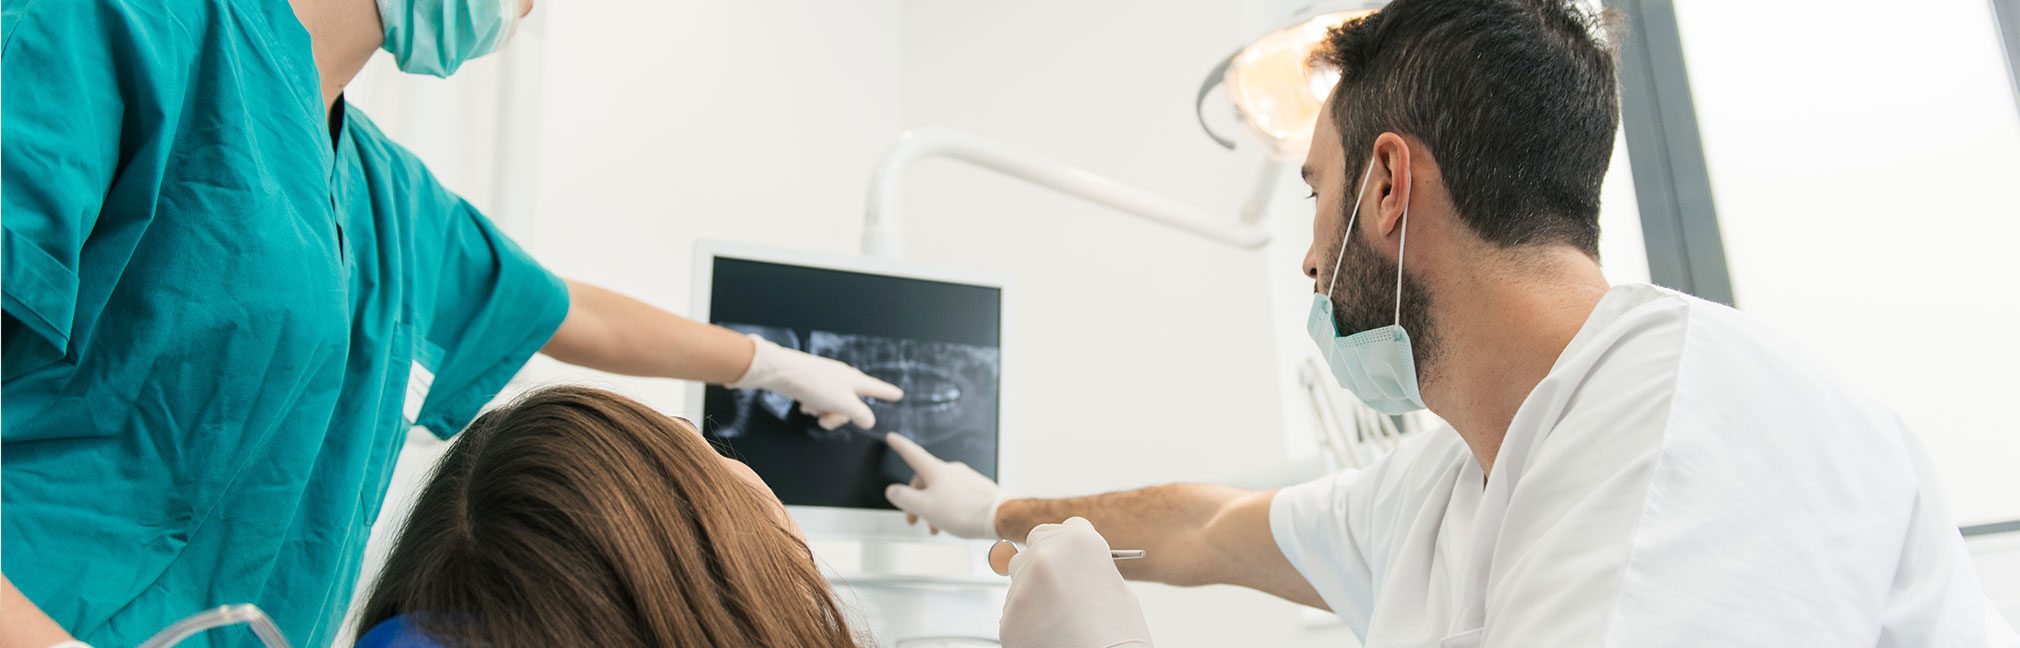 Male dentist looking at dental x rays with a dental hygienist | Robson Family Dentistry in Bellefontaine, OH